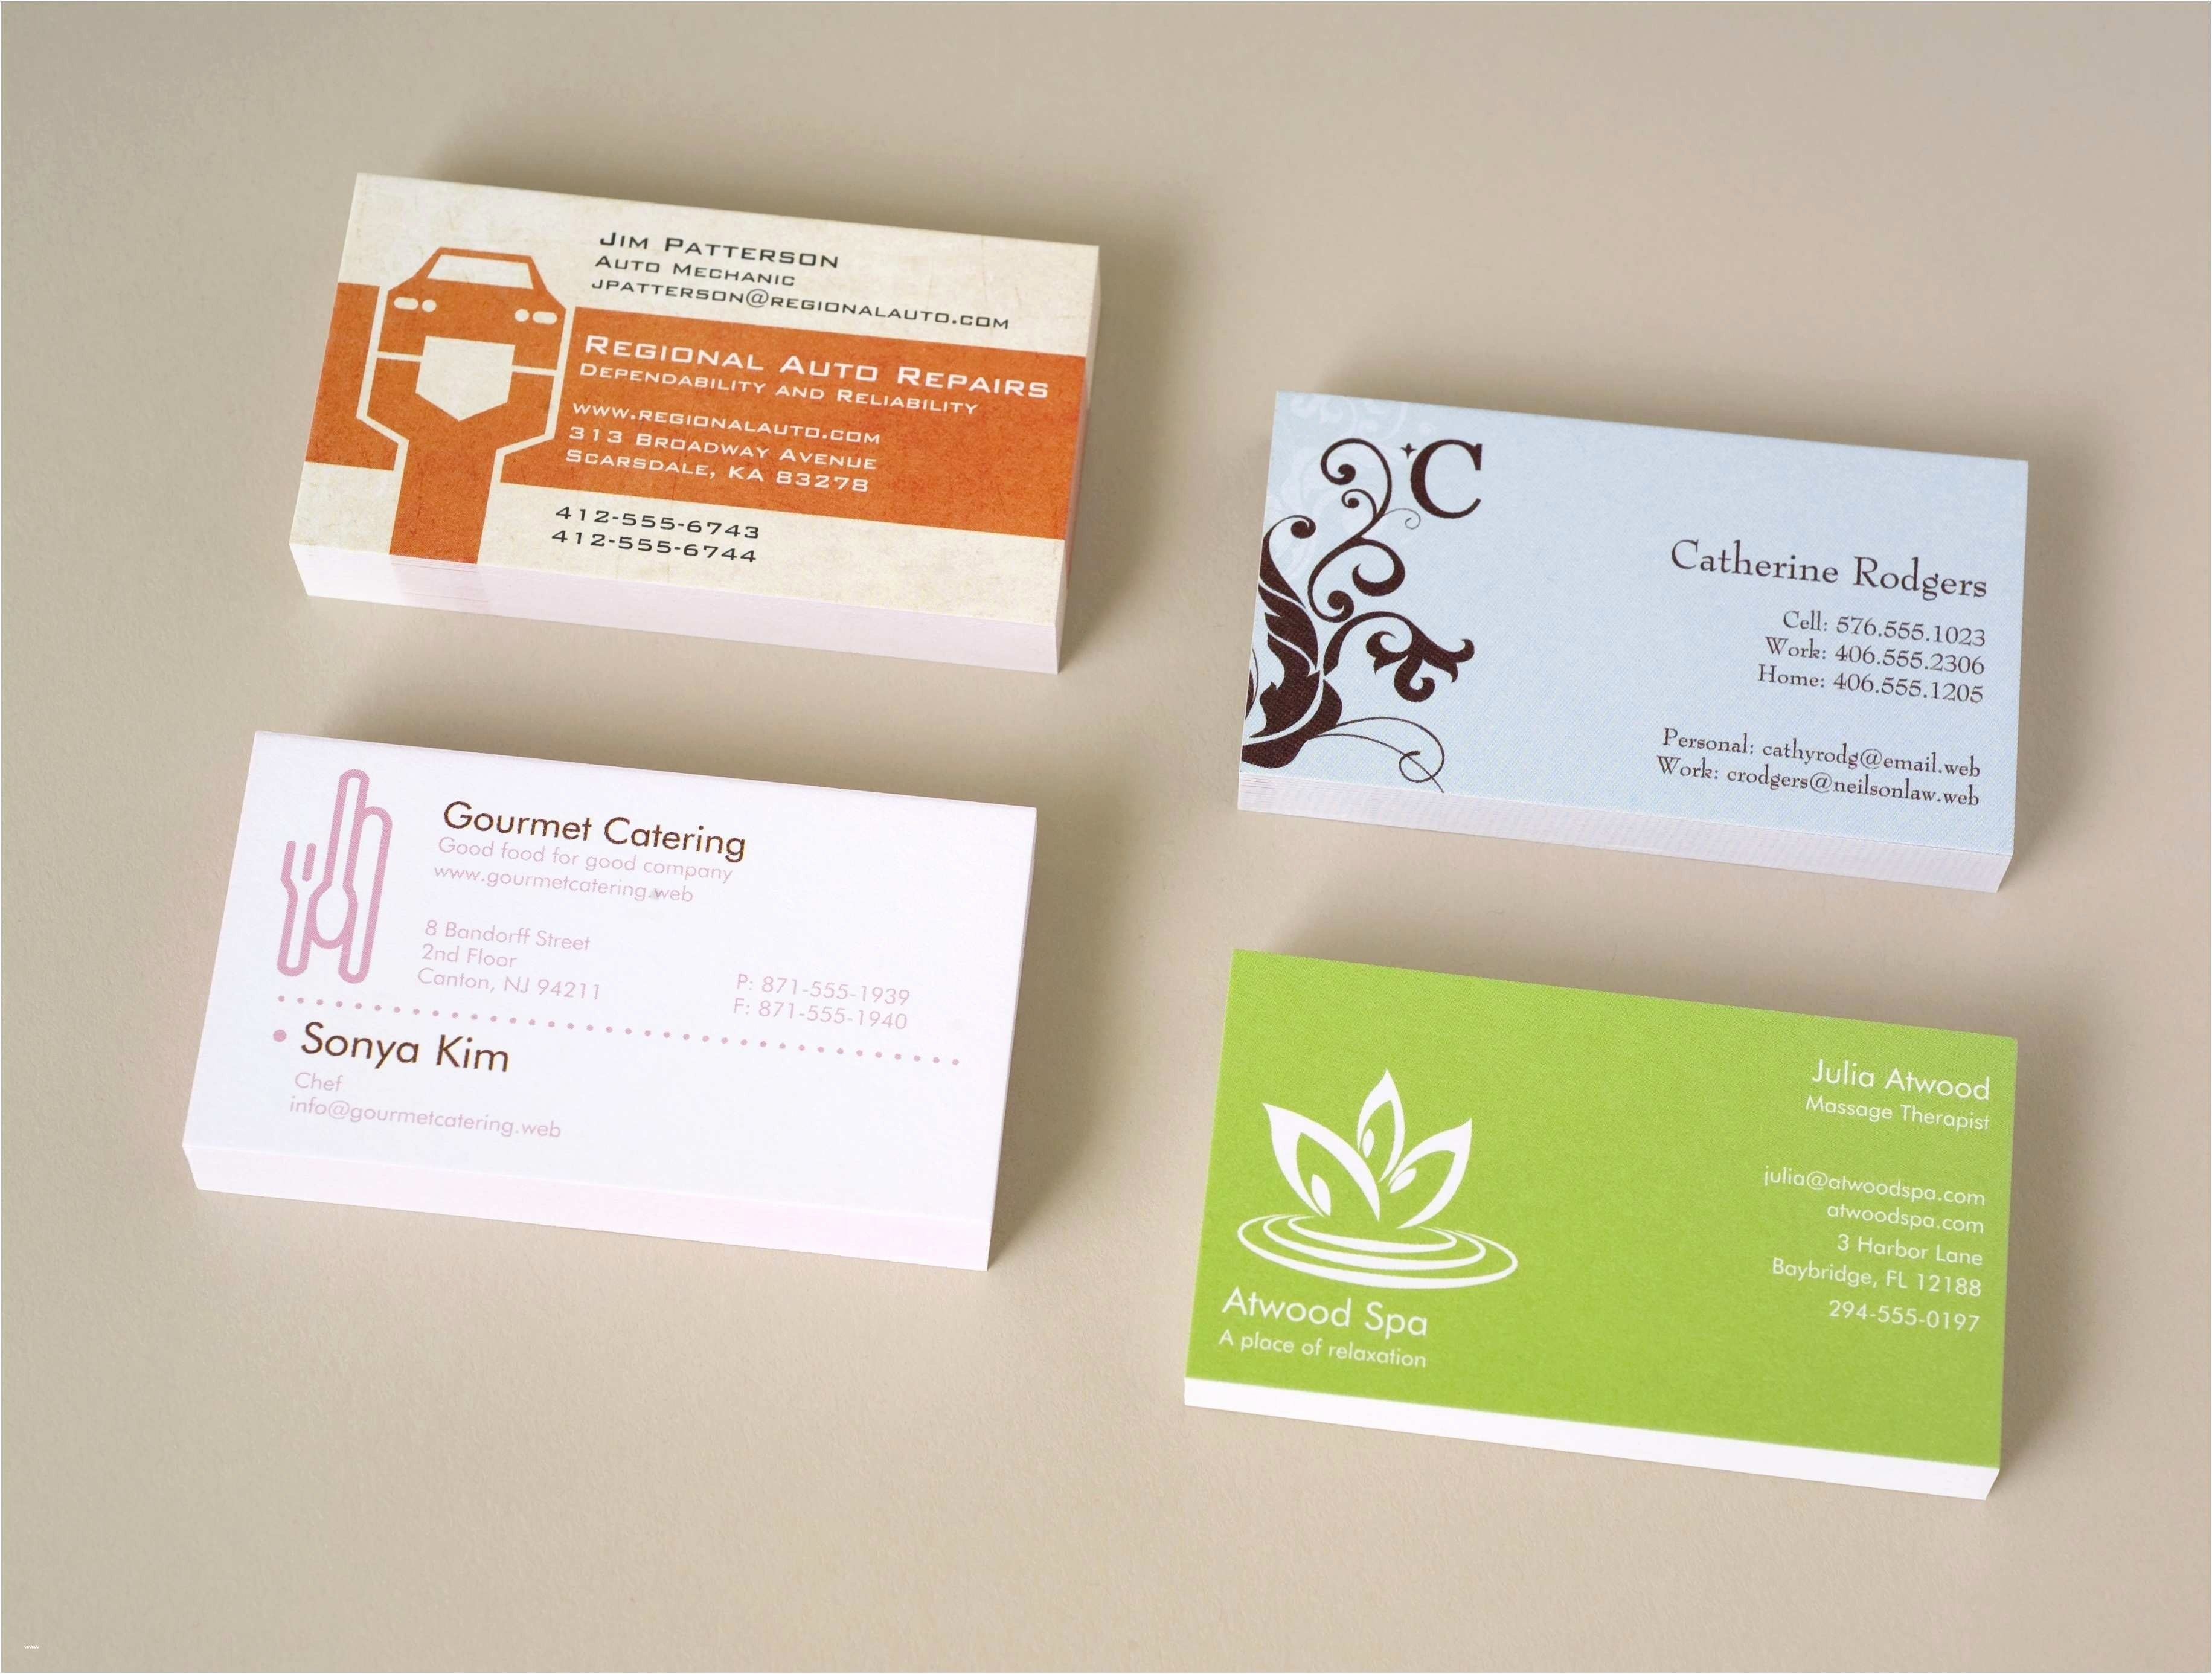 Inspirational Business Cards For Teachers Templates Free within Business Cards For Teachers Templates Free